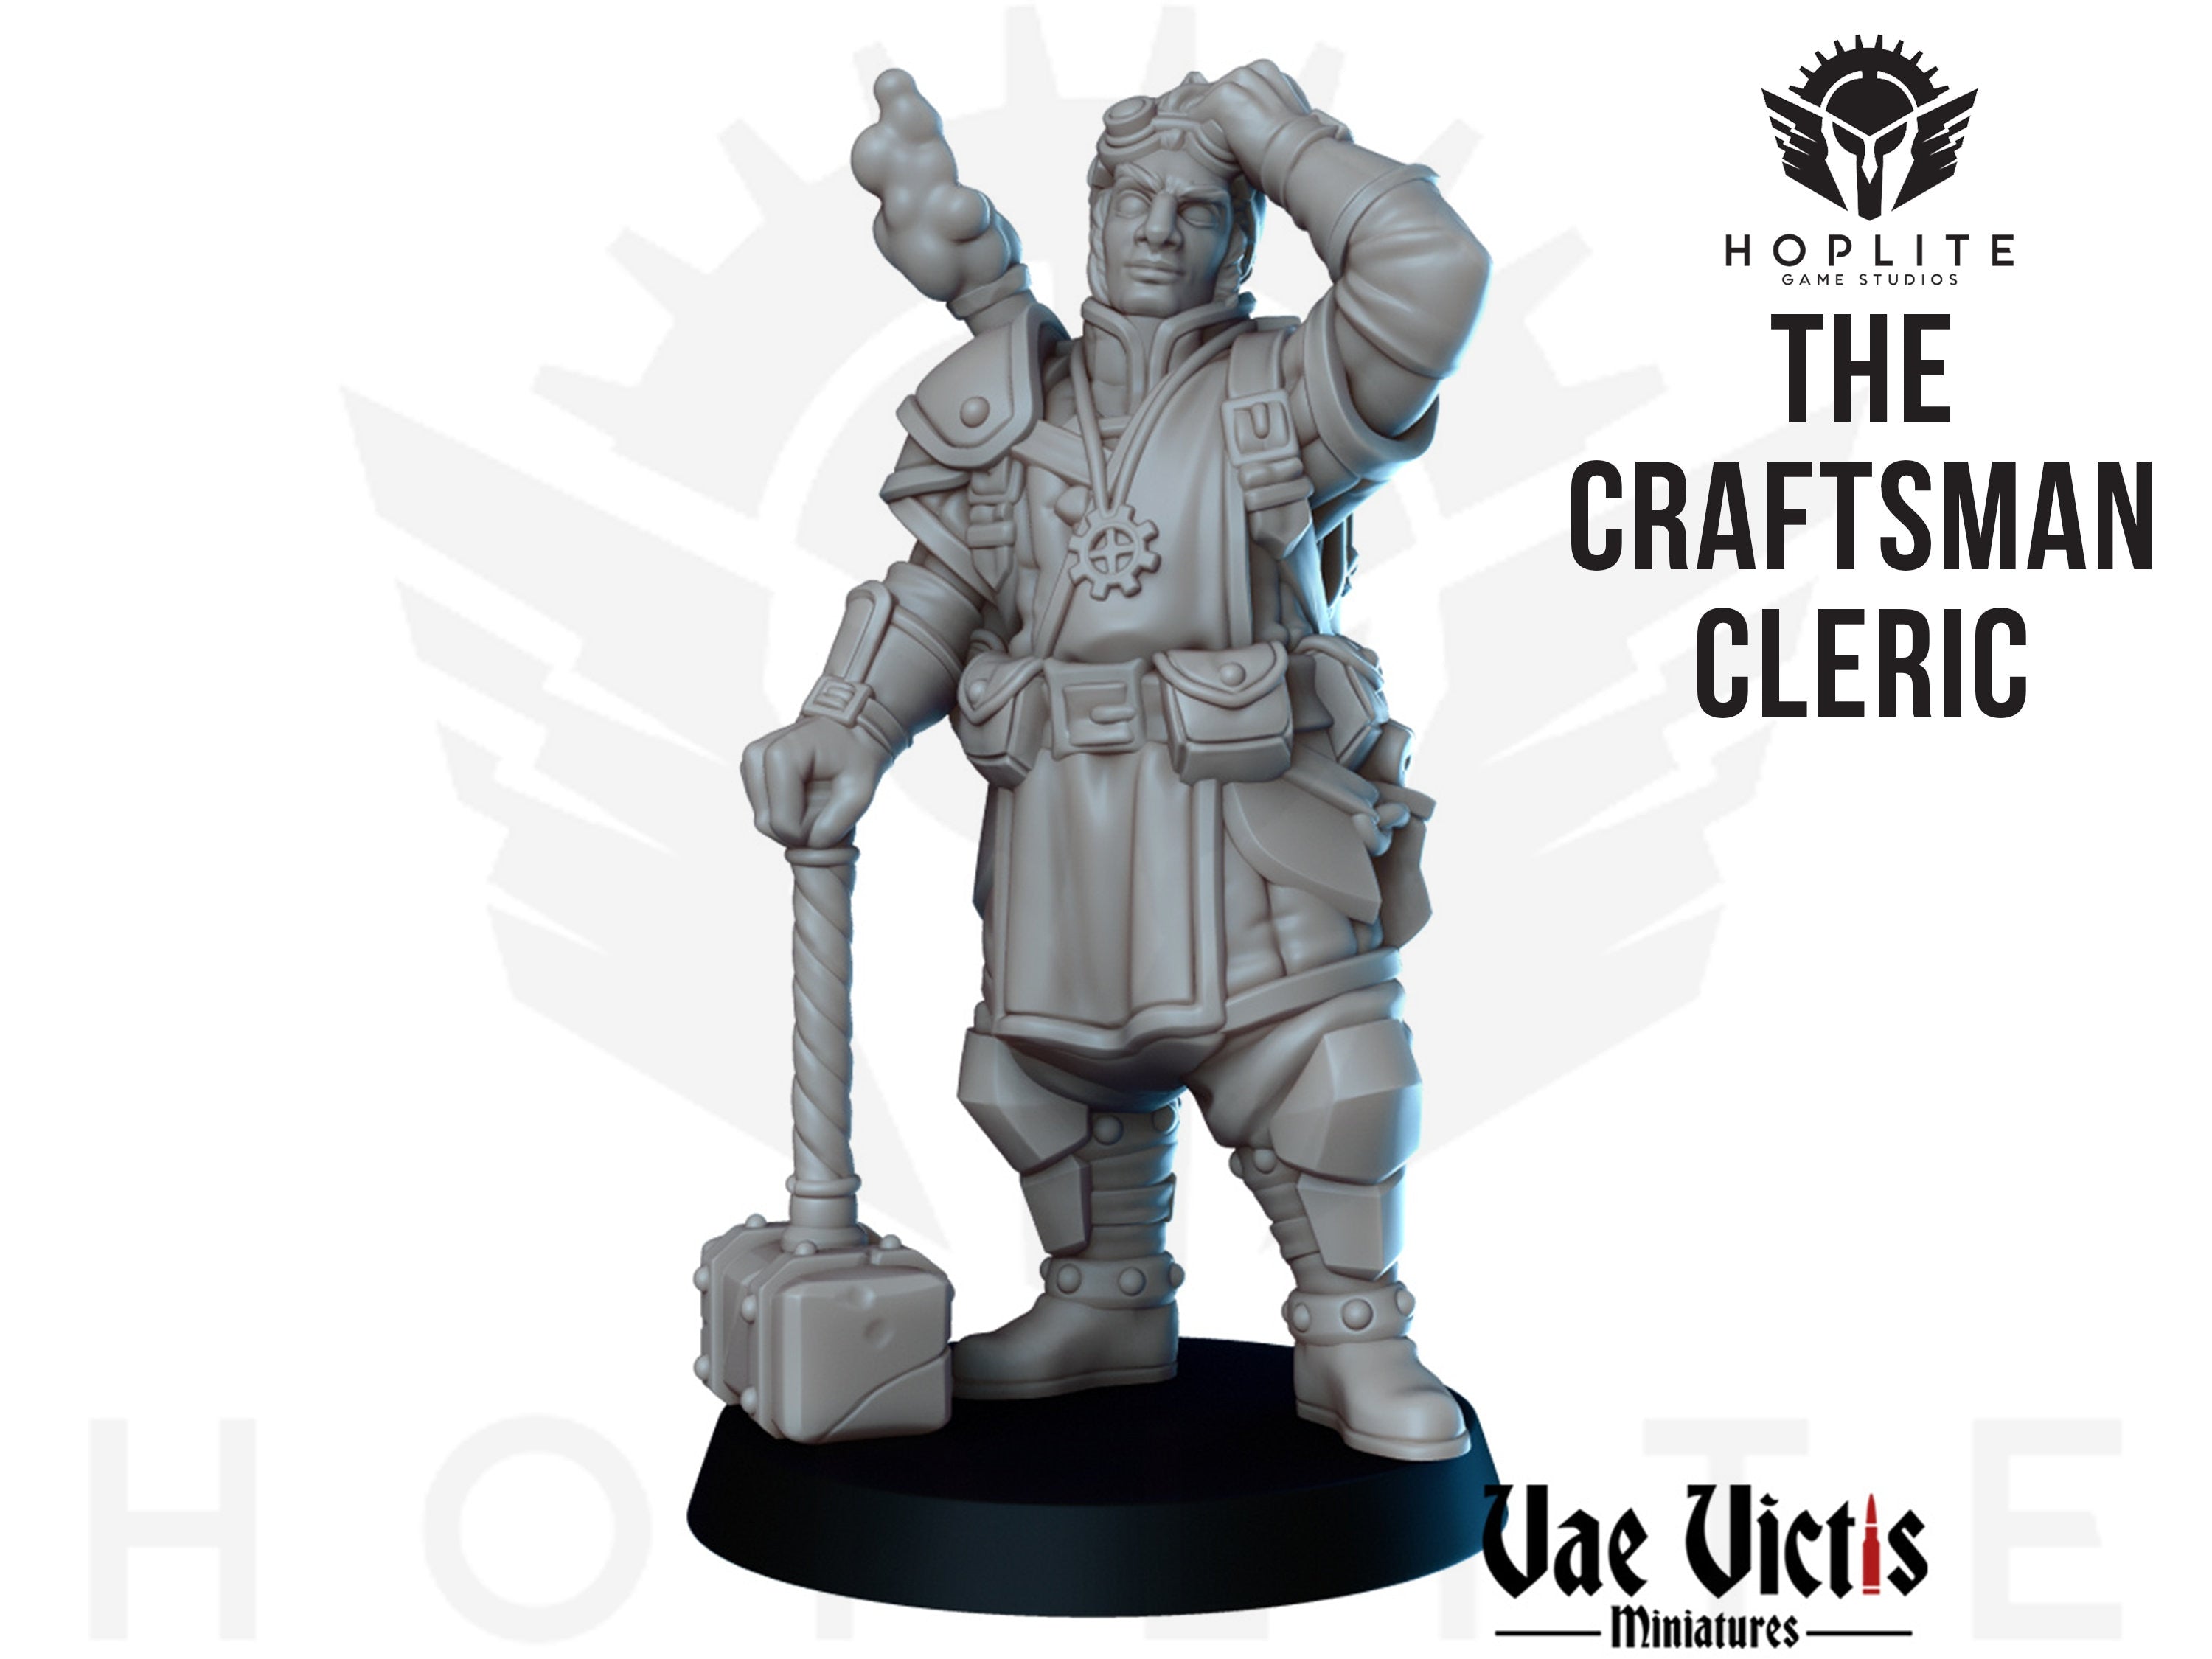 The Craftsman Cleric